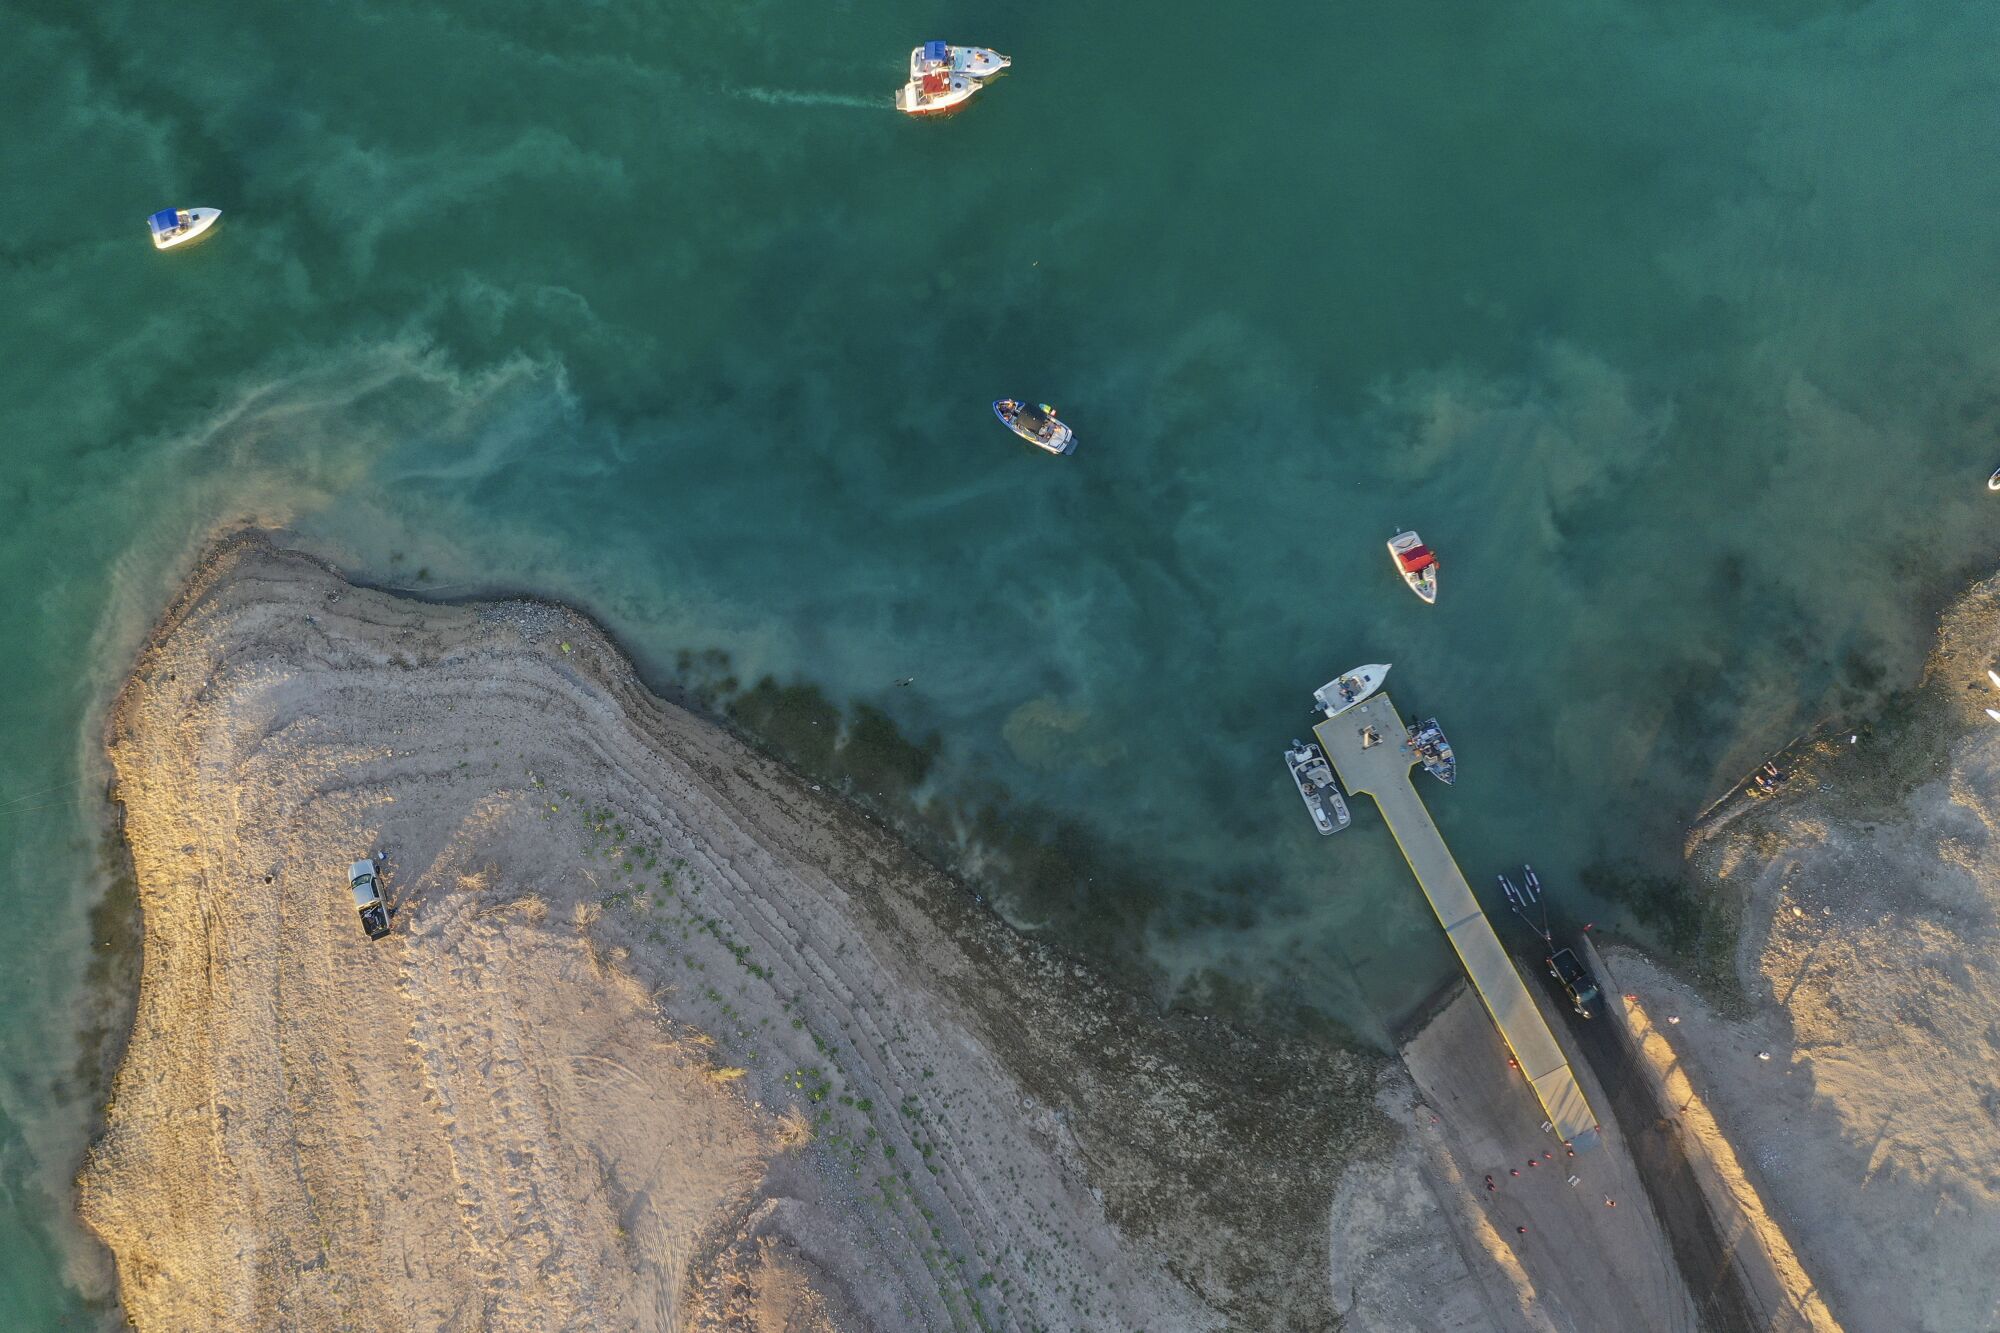 An aerial view of a boat launch ramp on the lake